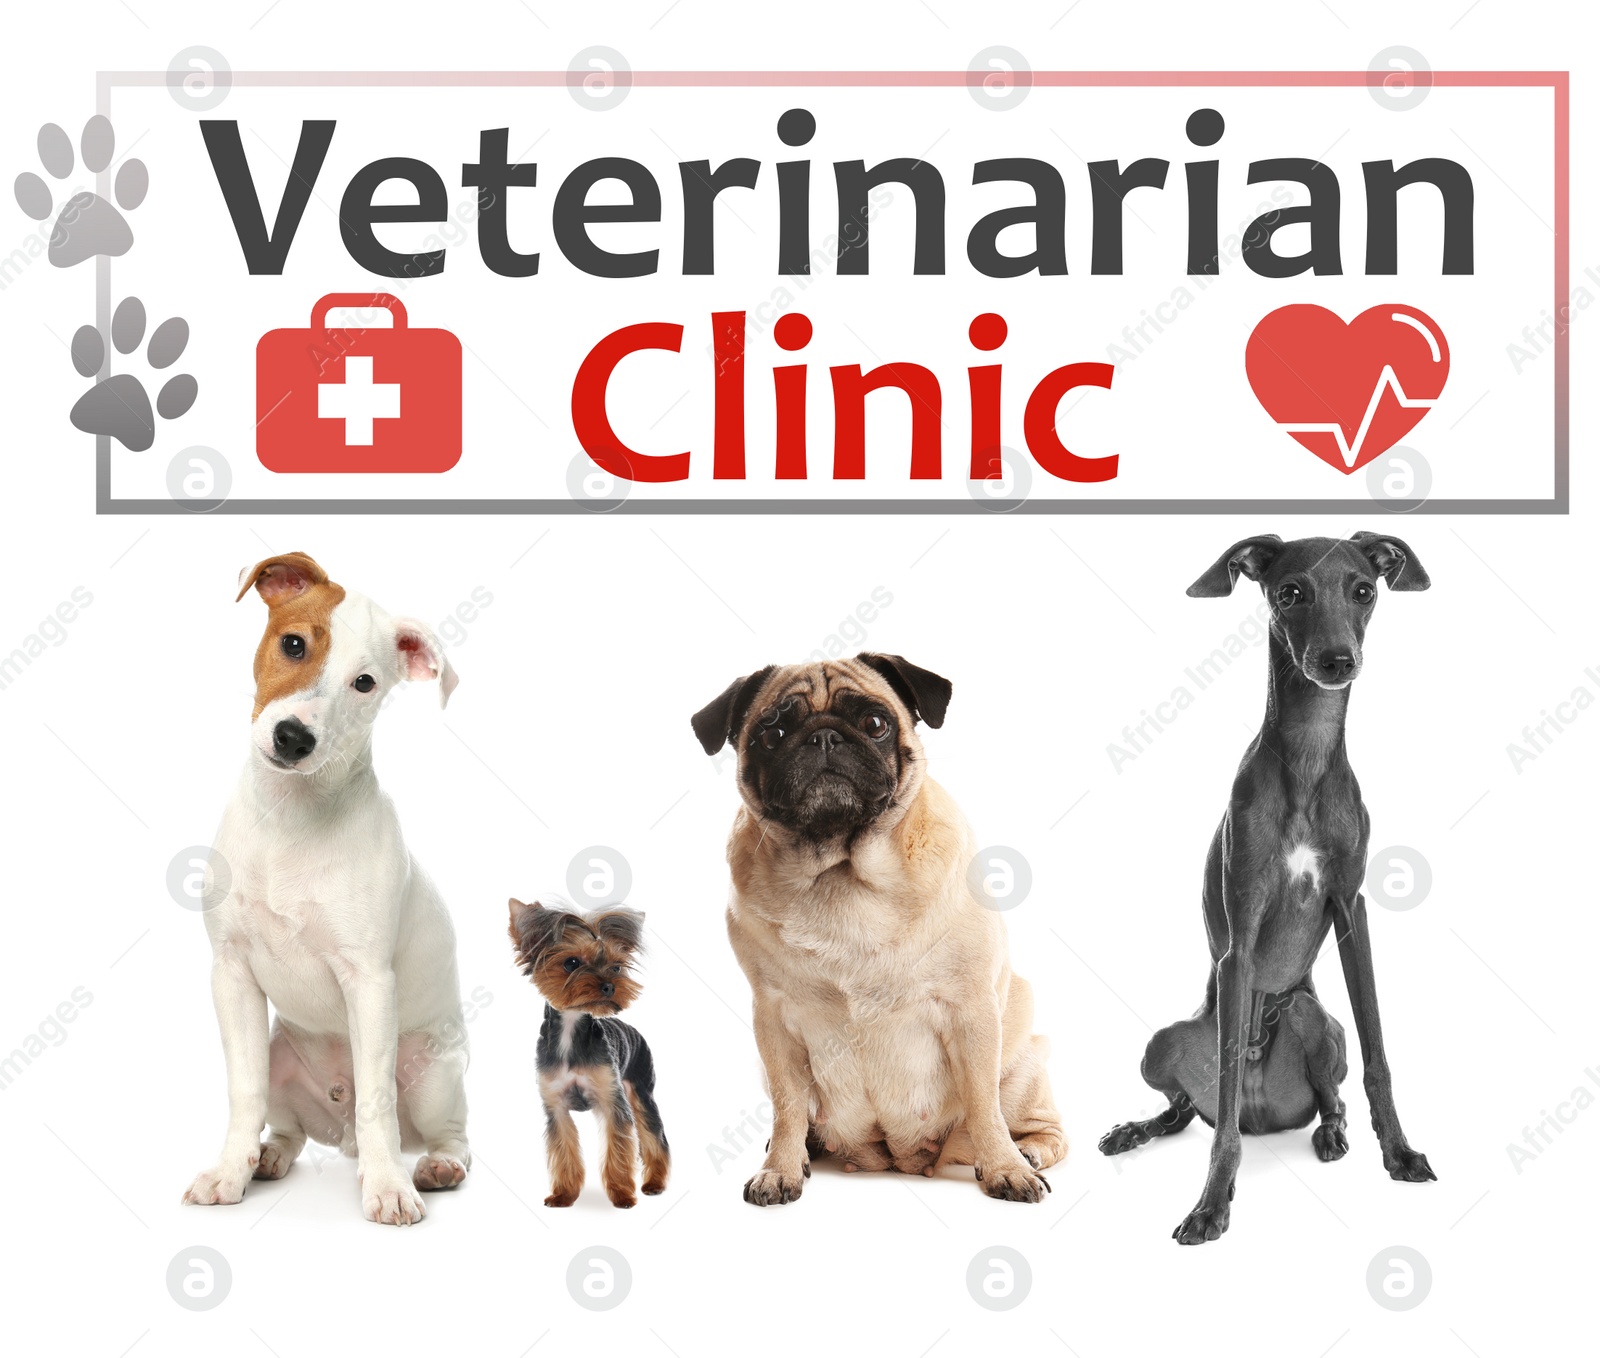 Image of Collage with adorable dogs and text Veterinarian Clinic on white background